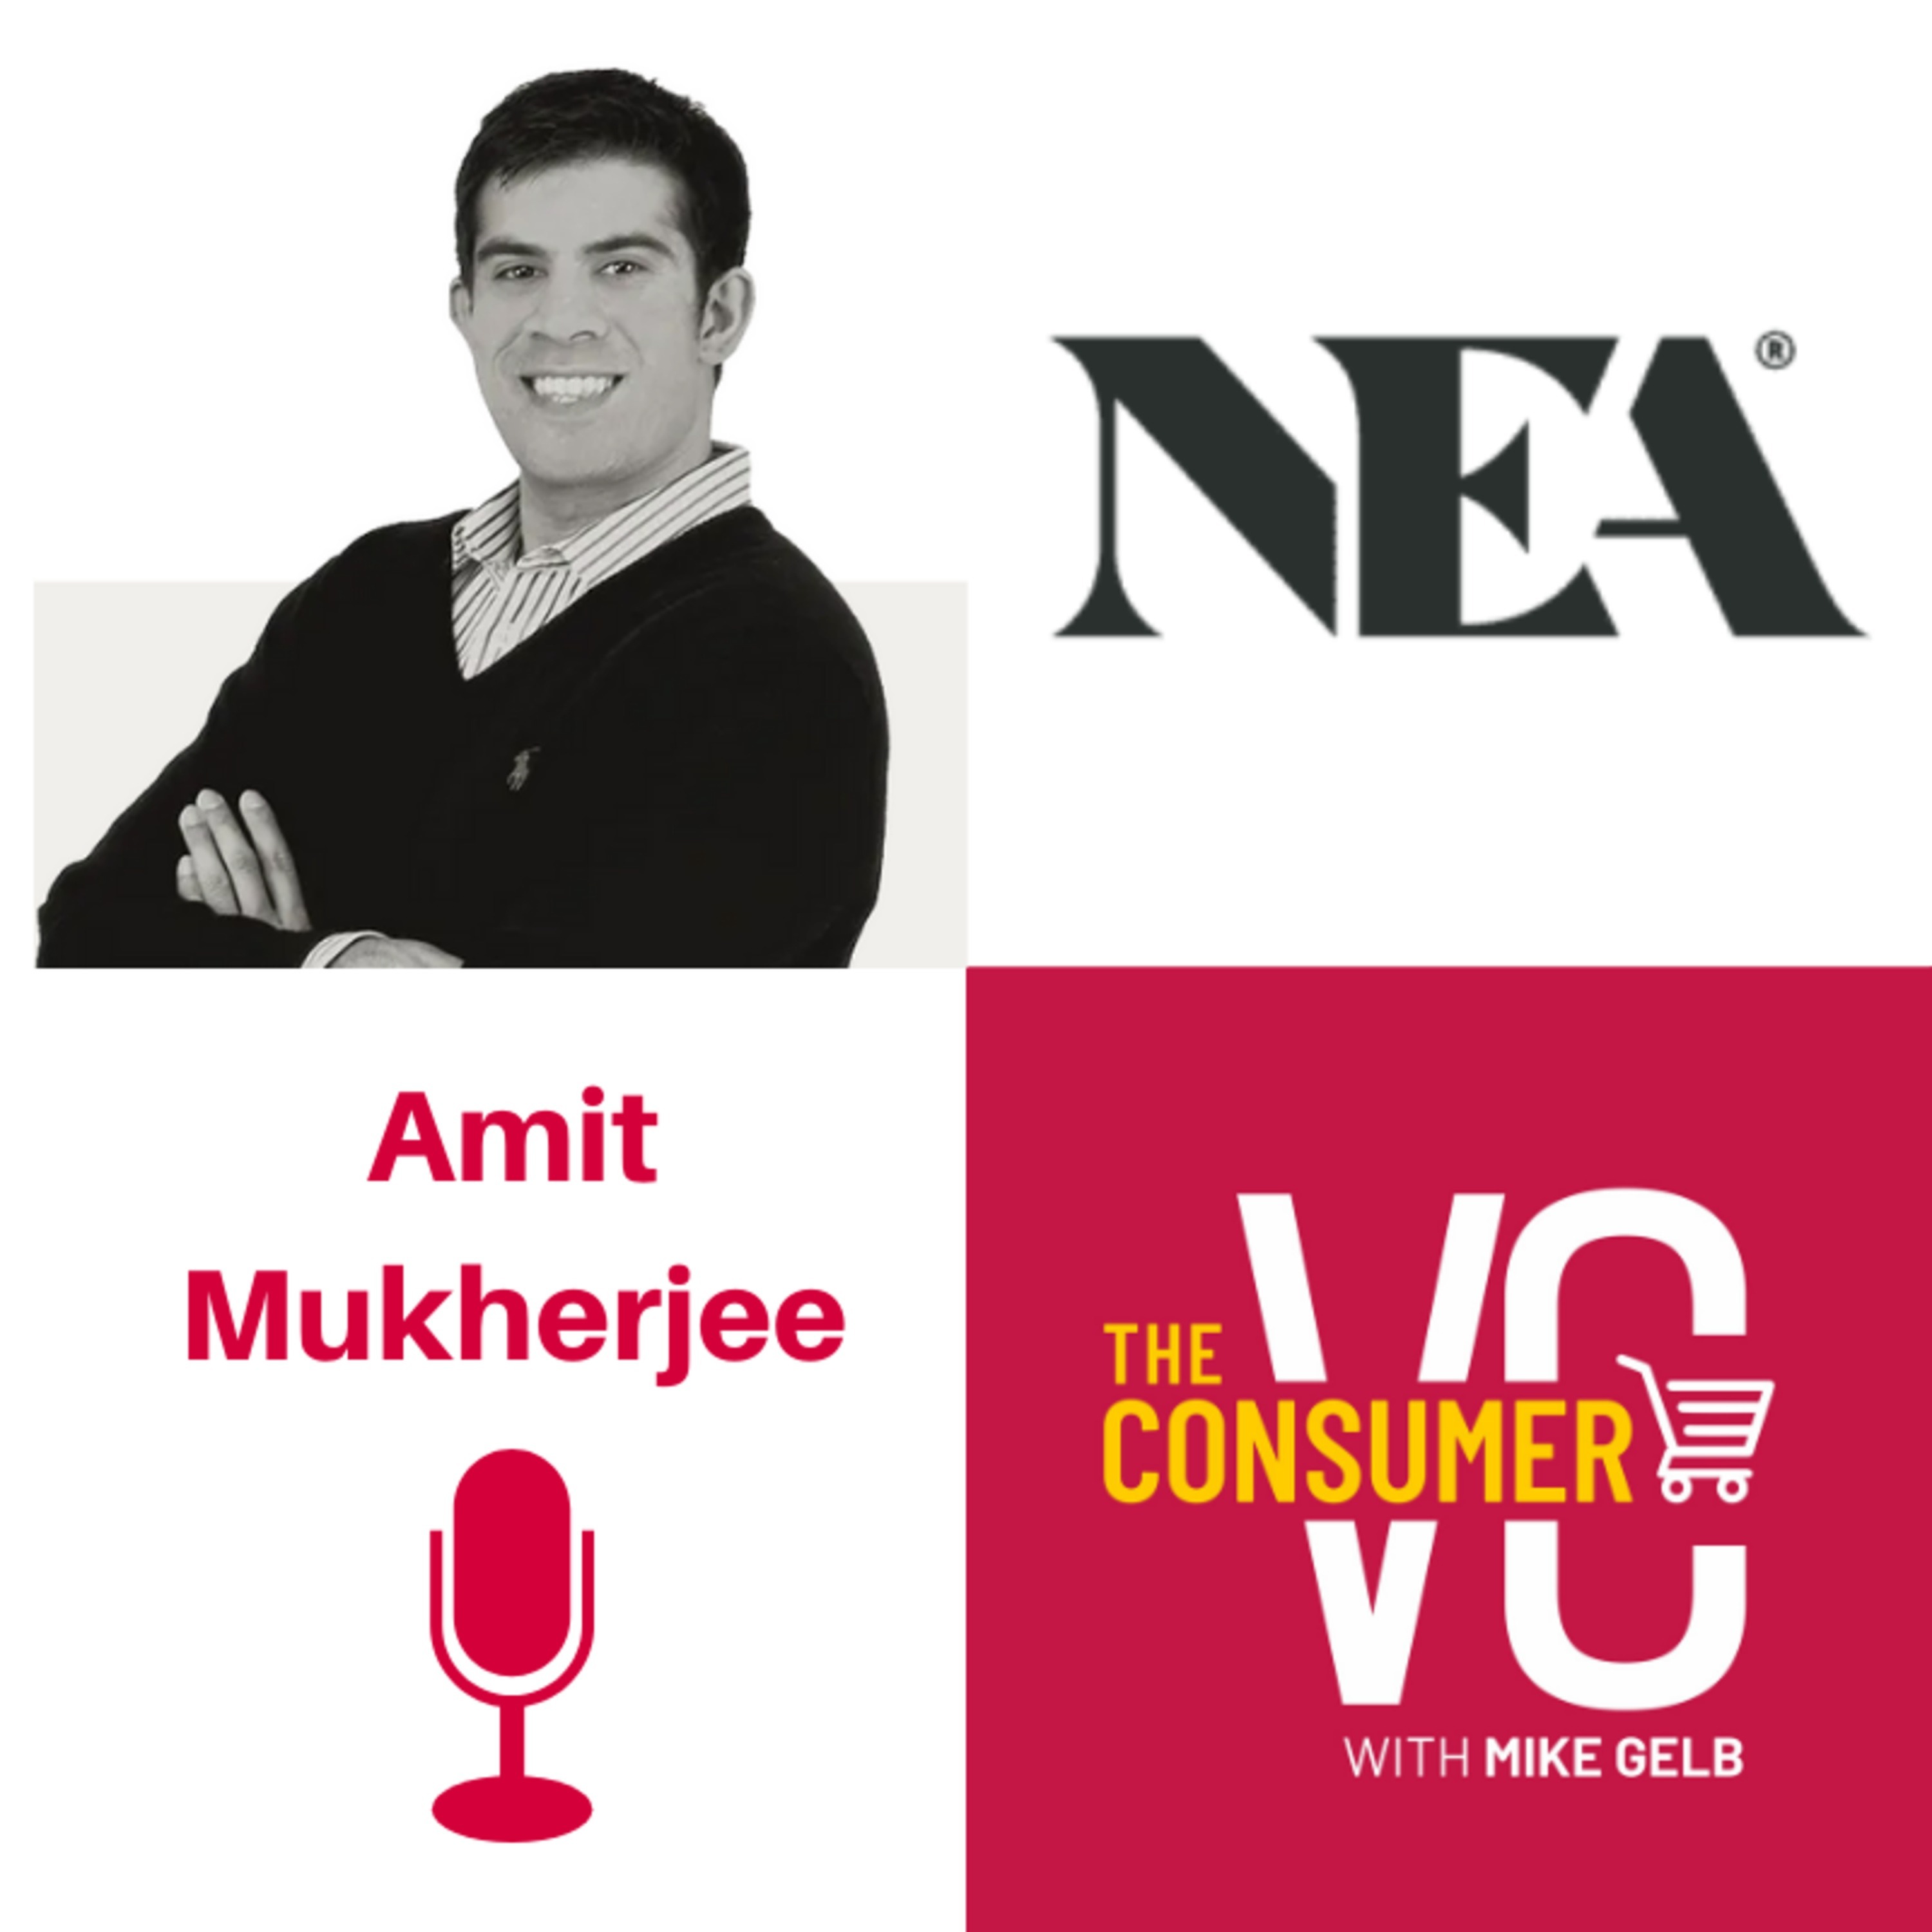 Amit Mukherjee (NEA) - The Gen Z Consumer, How to Evaluate Two Different Competing Companies